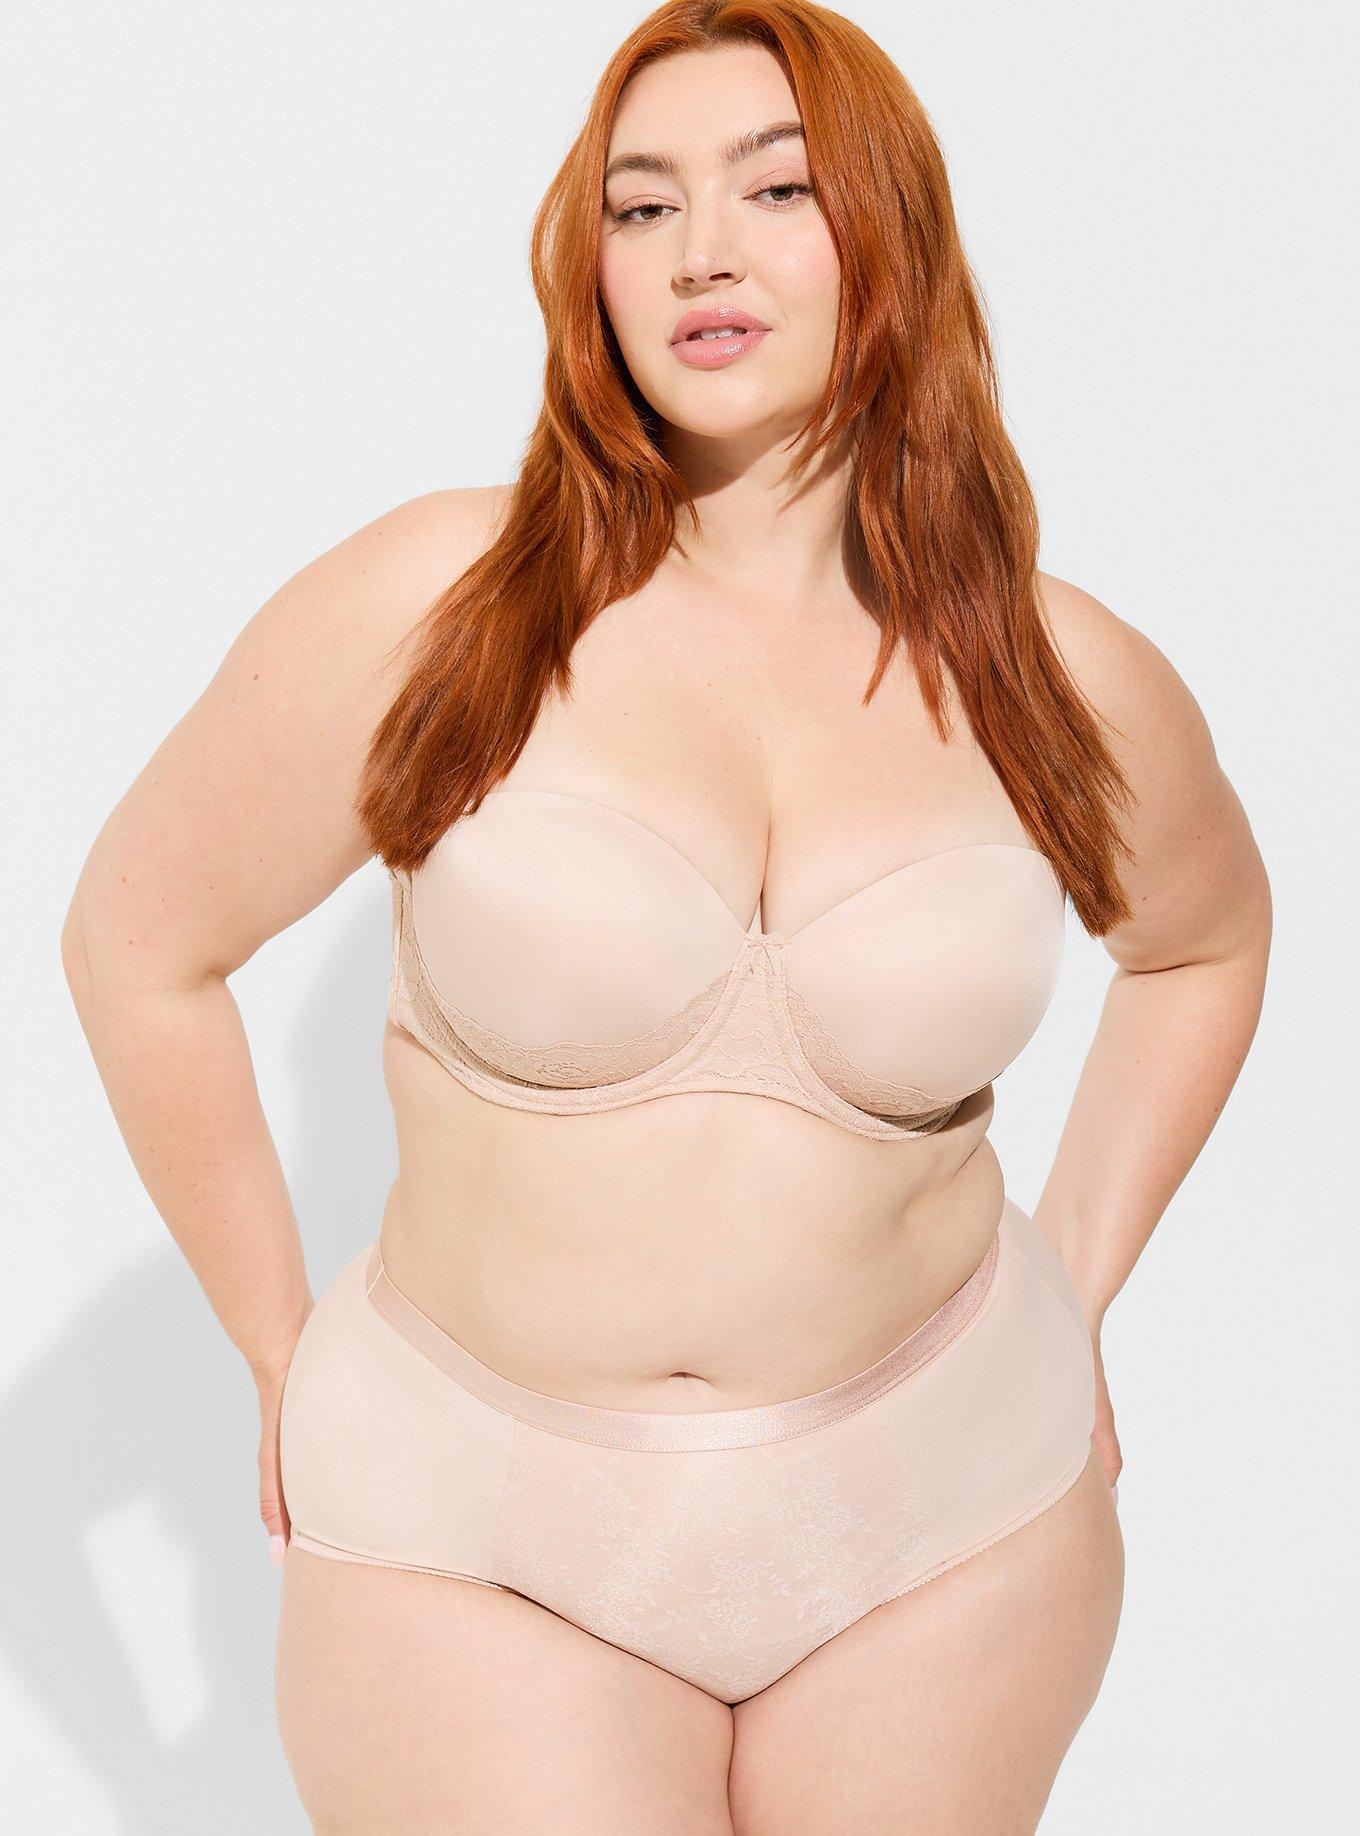 Buy Plus Size Quality Women Lingerie and Bras DC